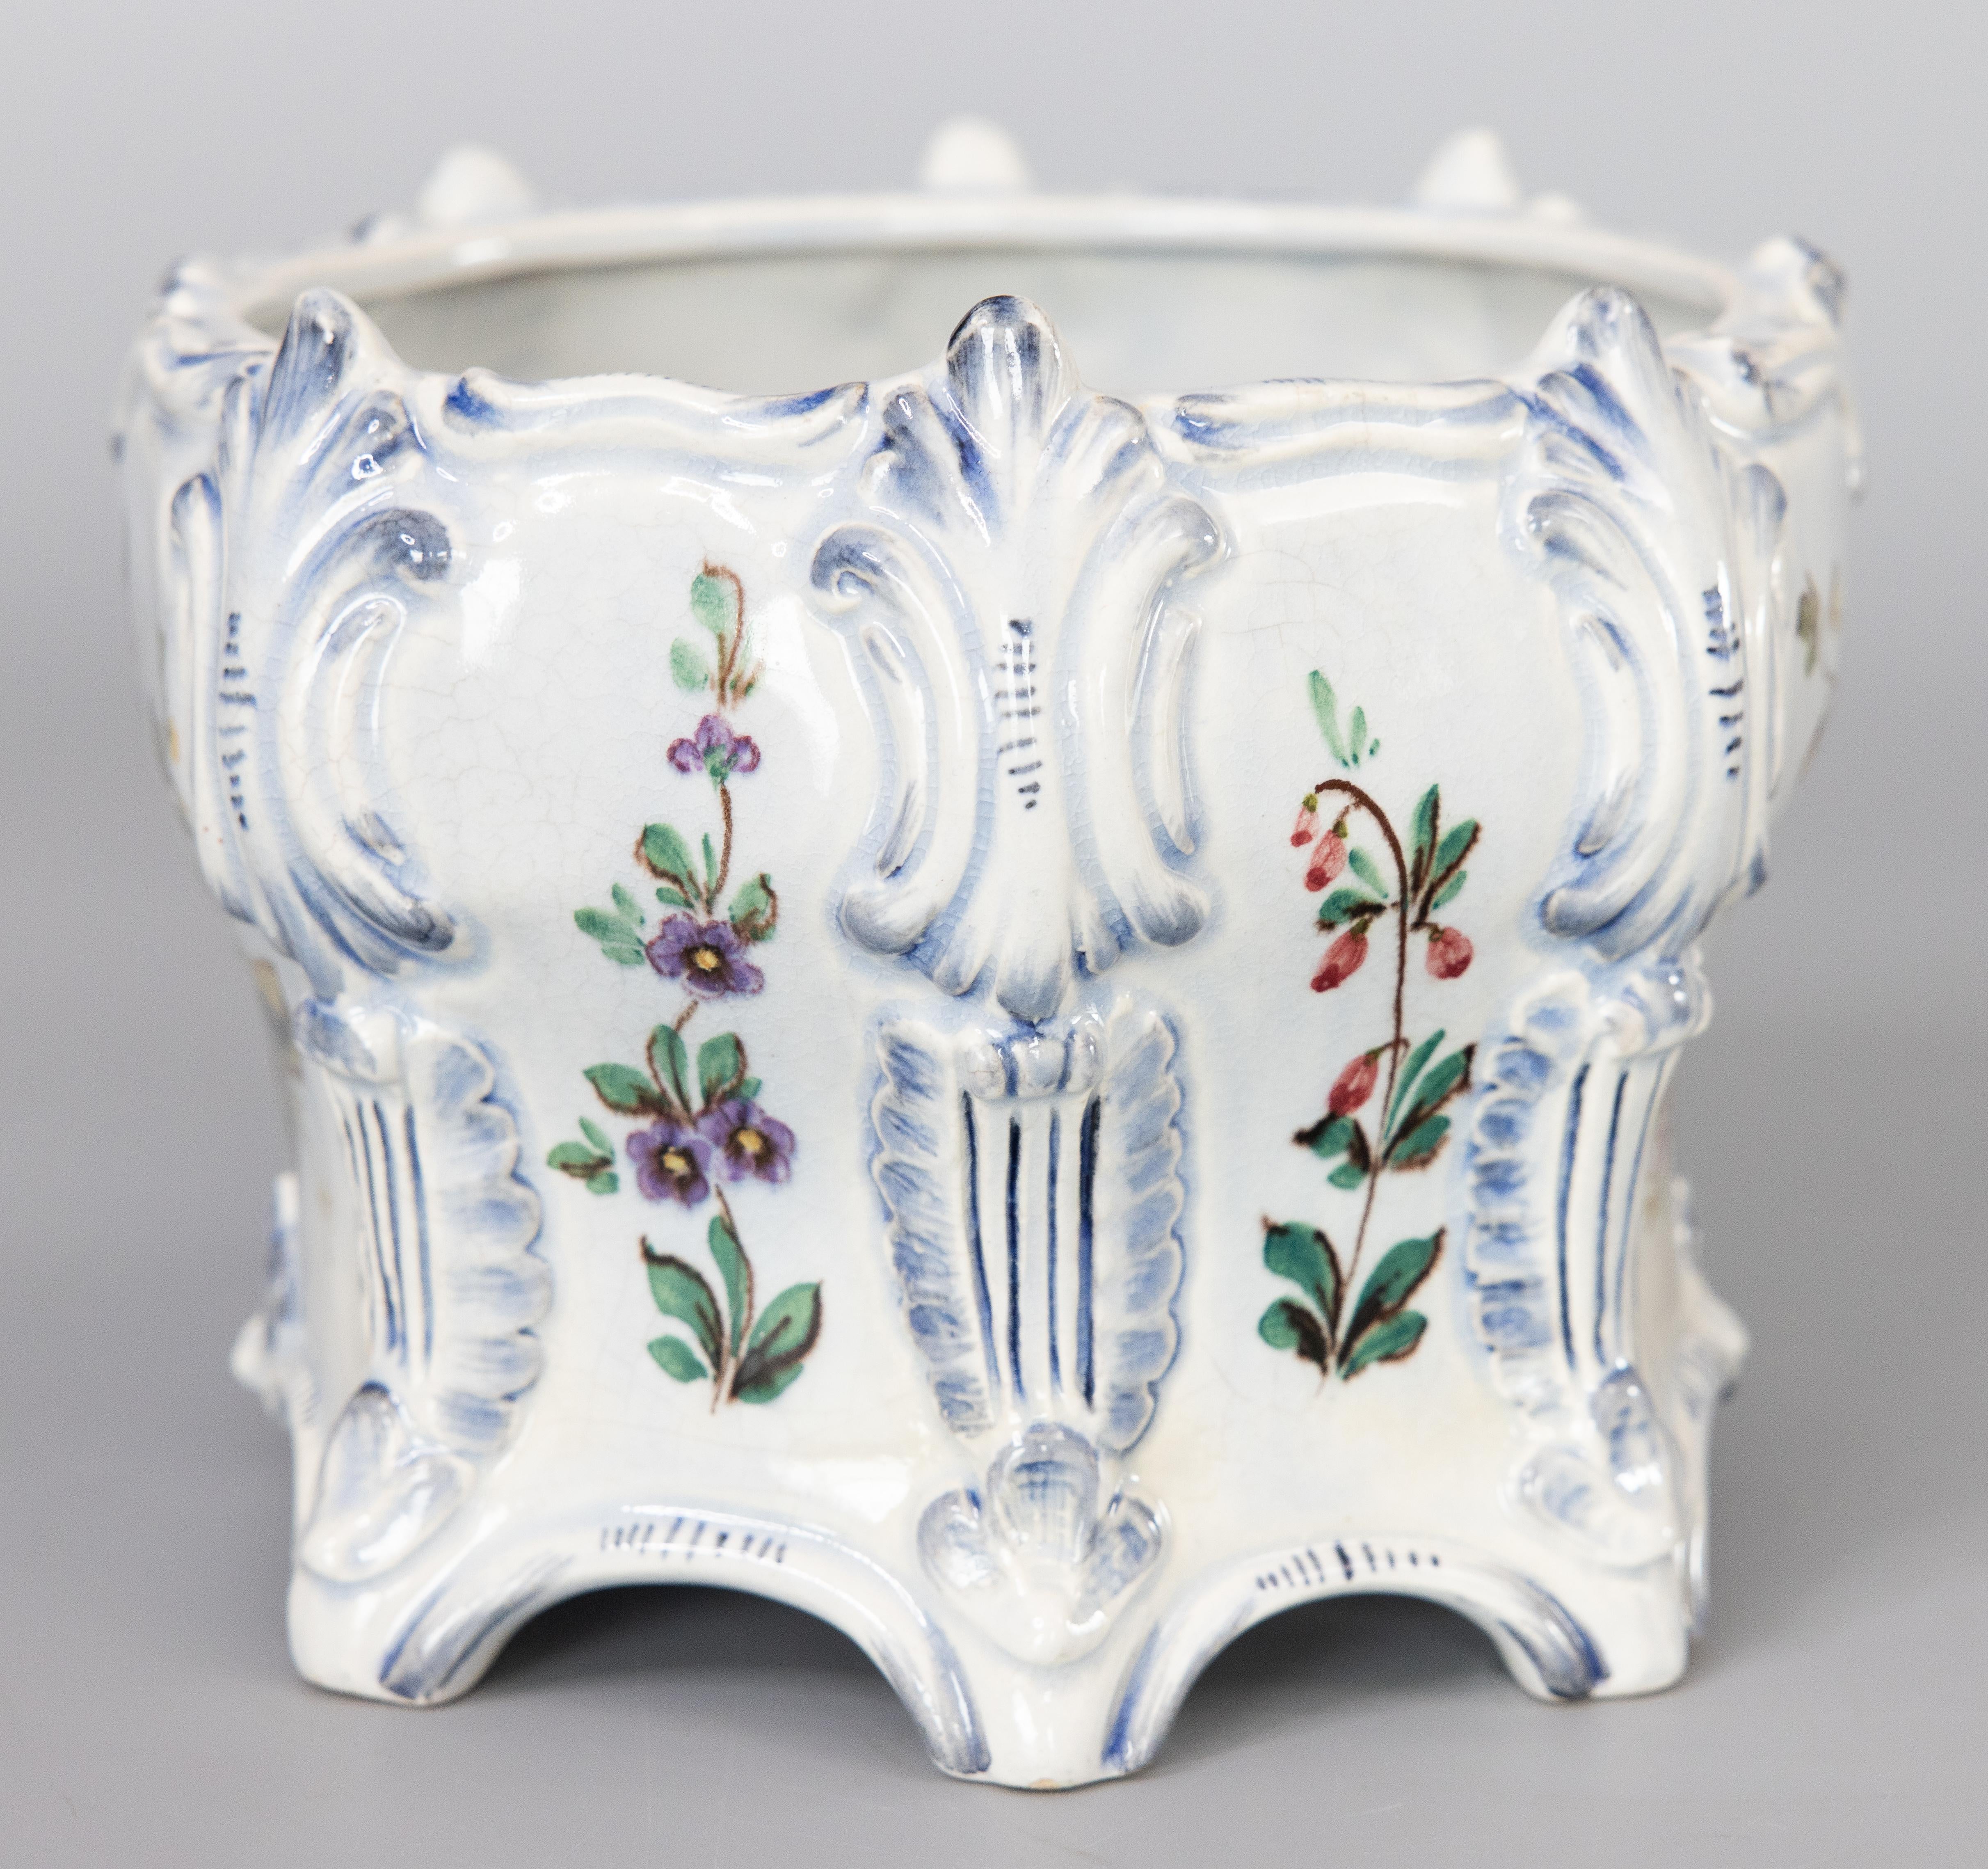 A lovely antique French floral faience hand painted jardiniere / cachepot / planter. Maker's mark on reverse. It would be gorgeous displayed with your favorite plant or with decorative items.

DIMENSIONS
7.5